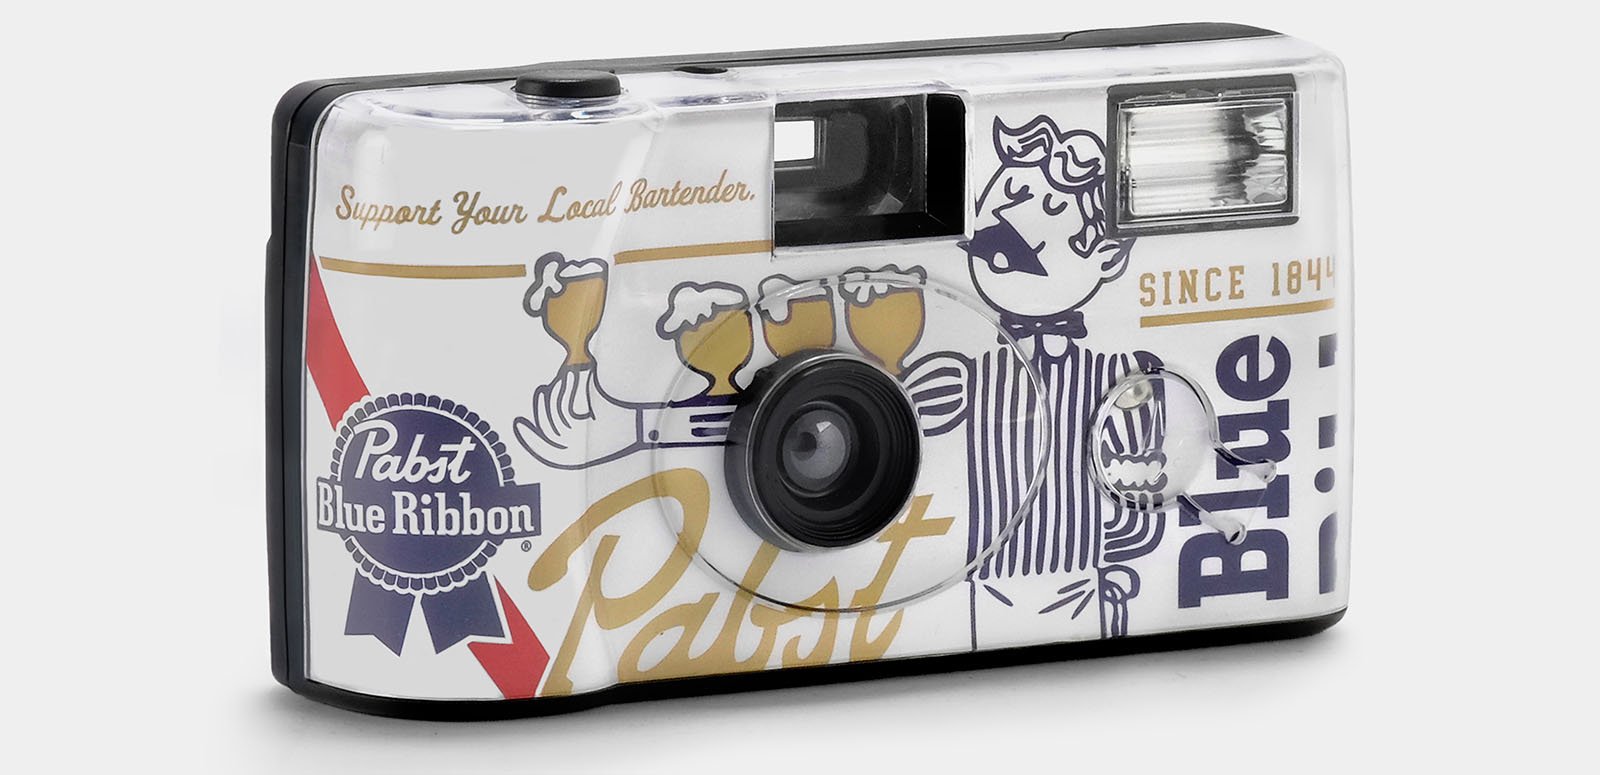 A disposable camera with a Pabst Blue Ribbon design. The front features illustrations of people holding beer mugs, the Pabst logo, and the text "Support Your Local Bartender" and "Since 1844." The background is white with blue and gold accents.